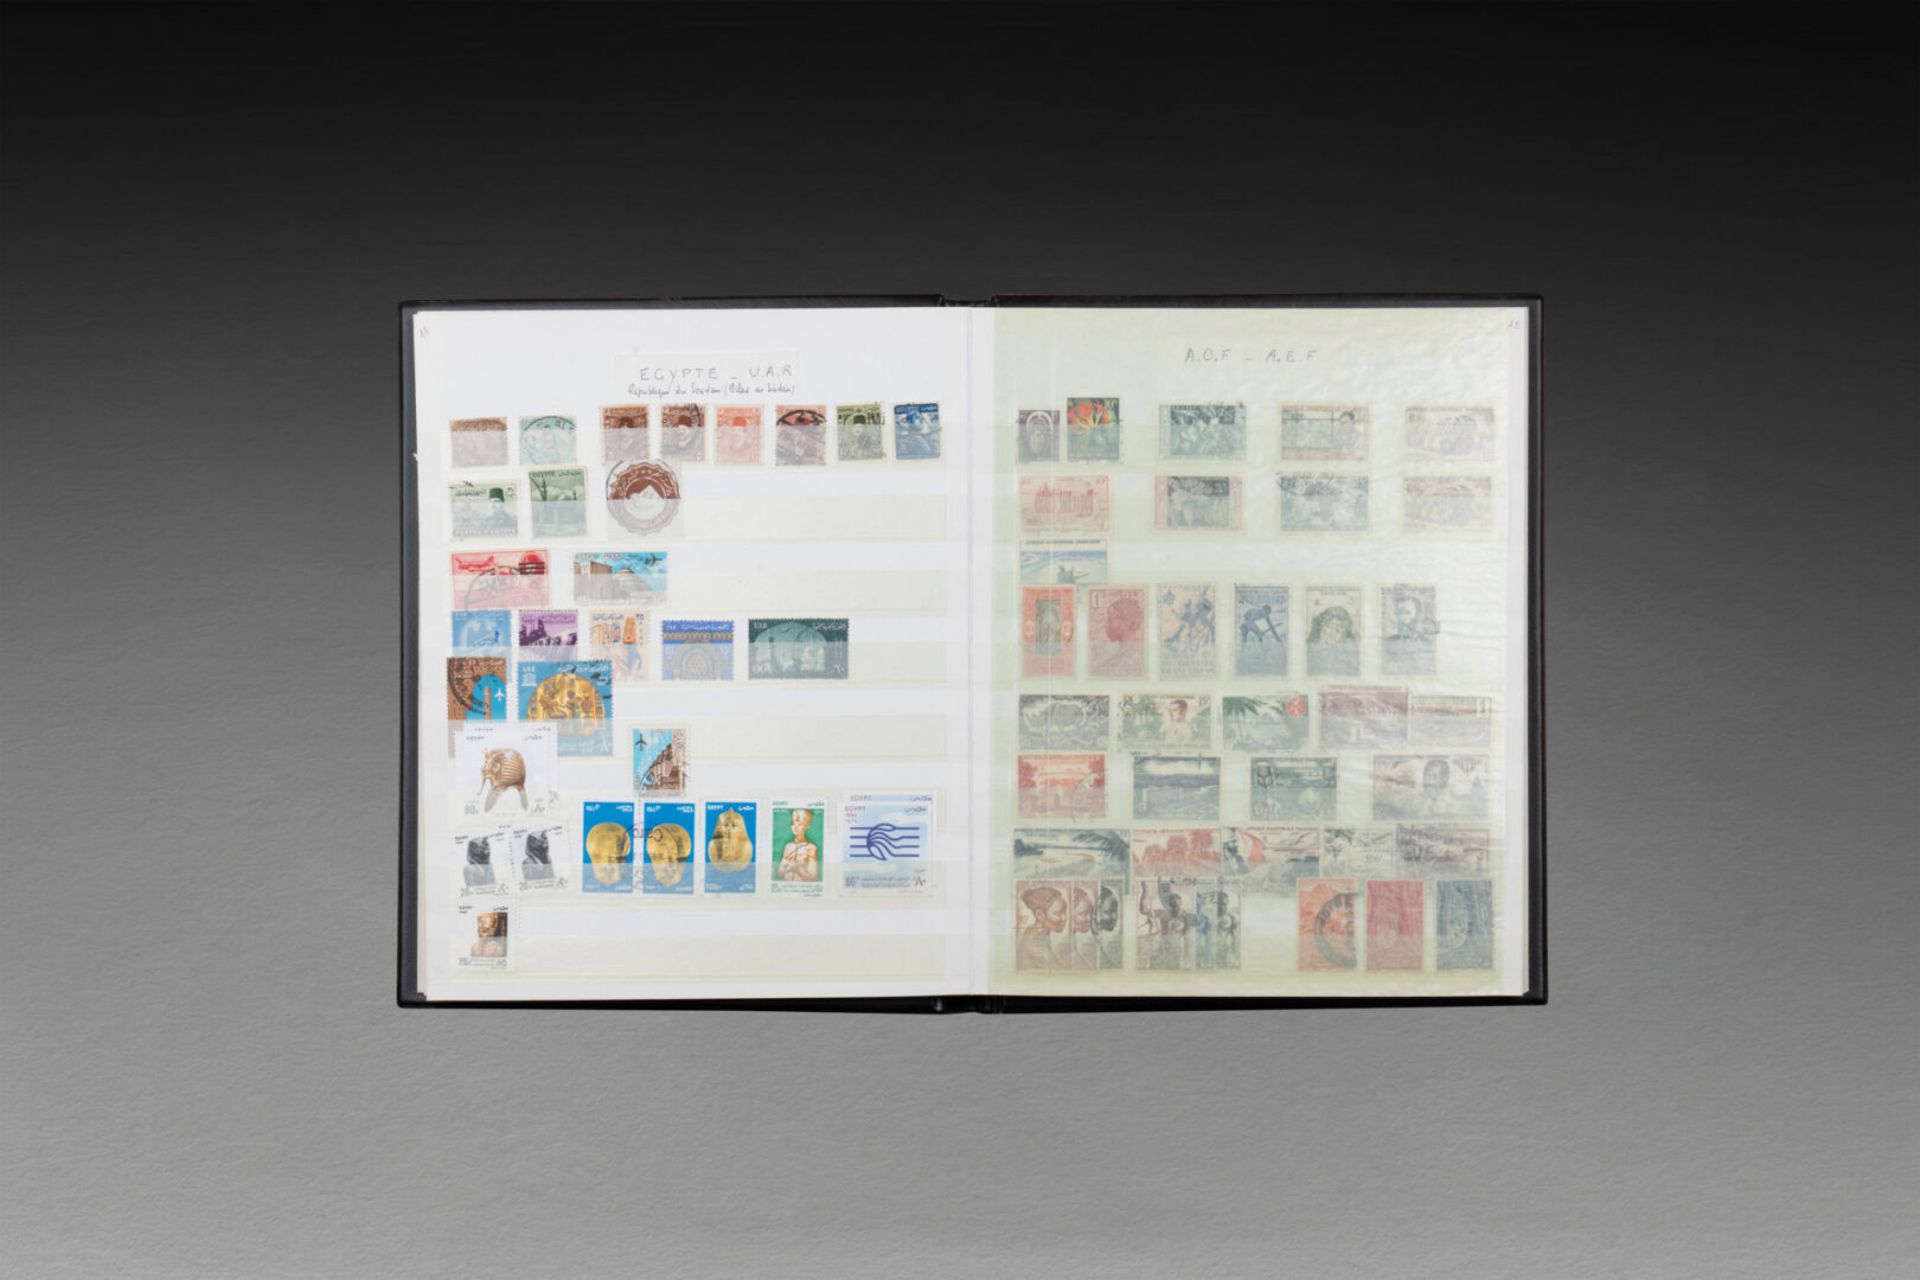 TIMBRES - Image 40 of 57